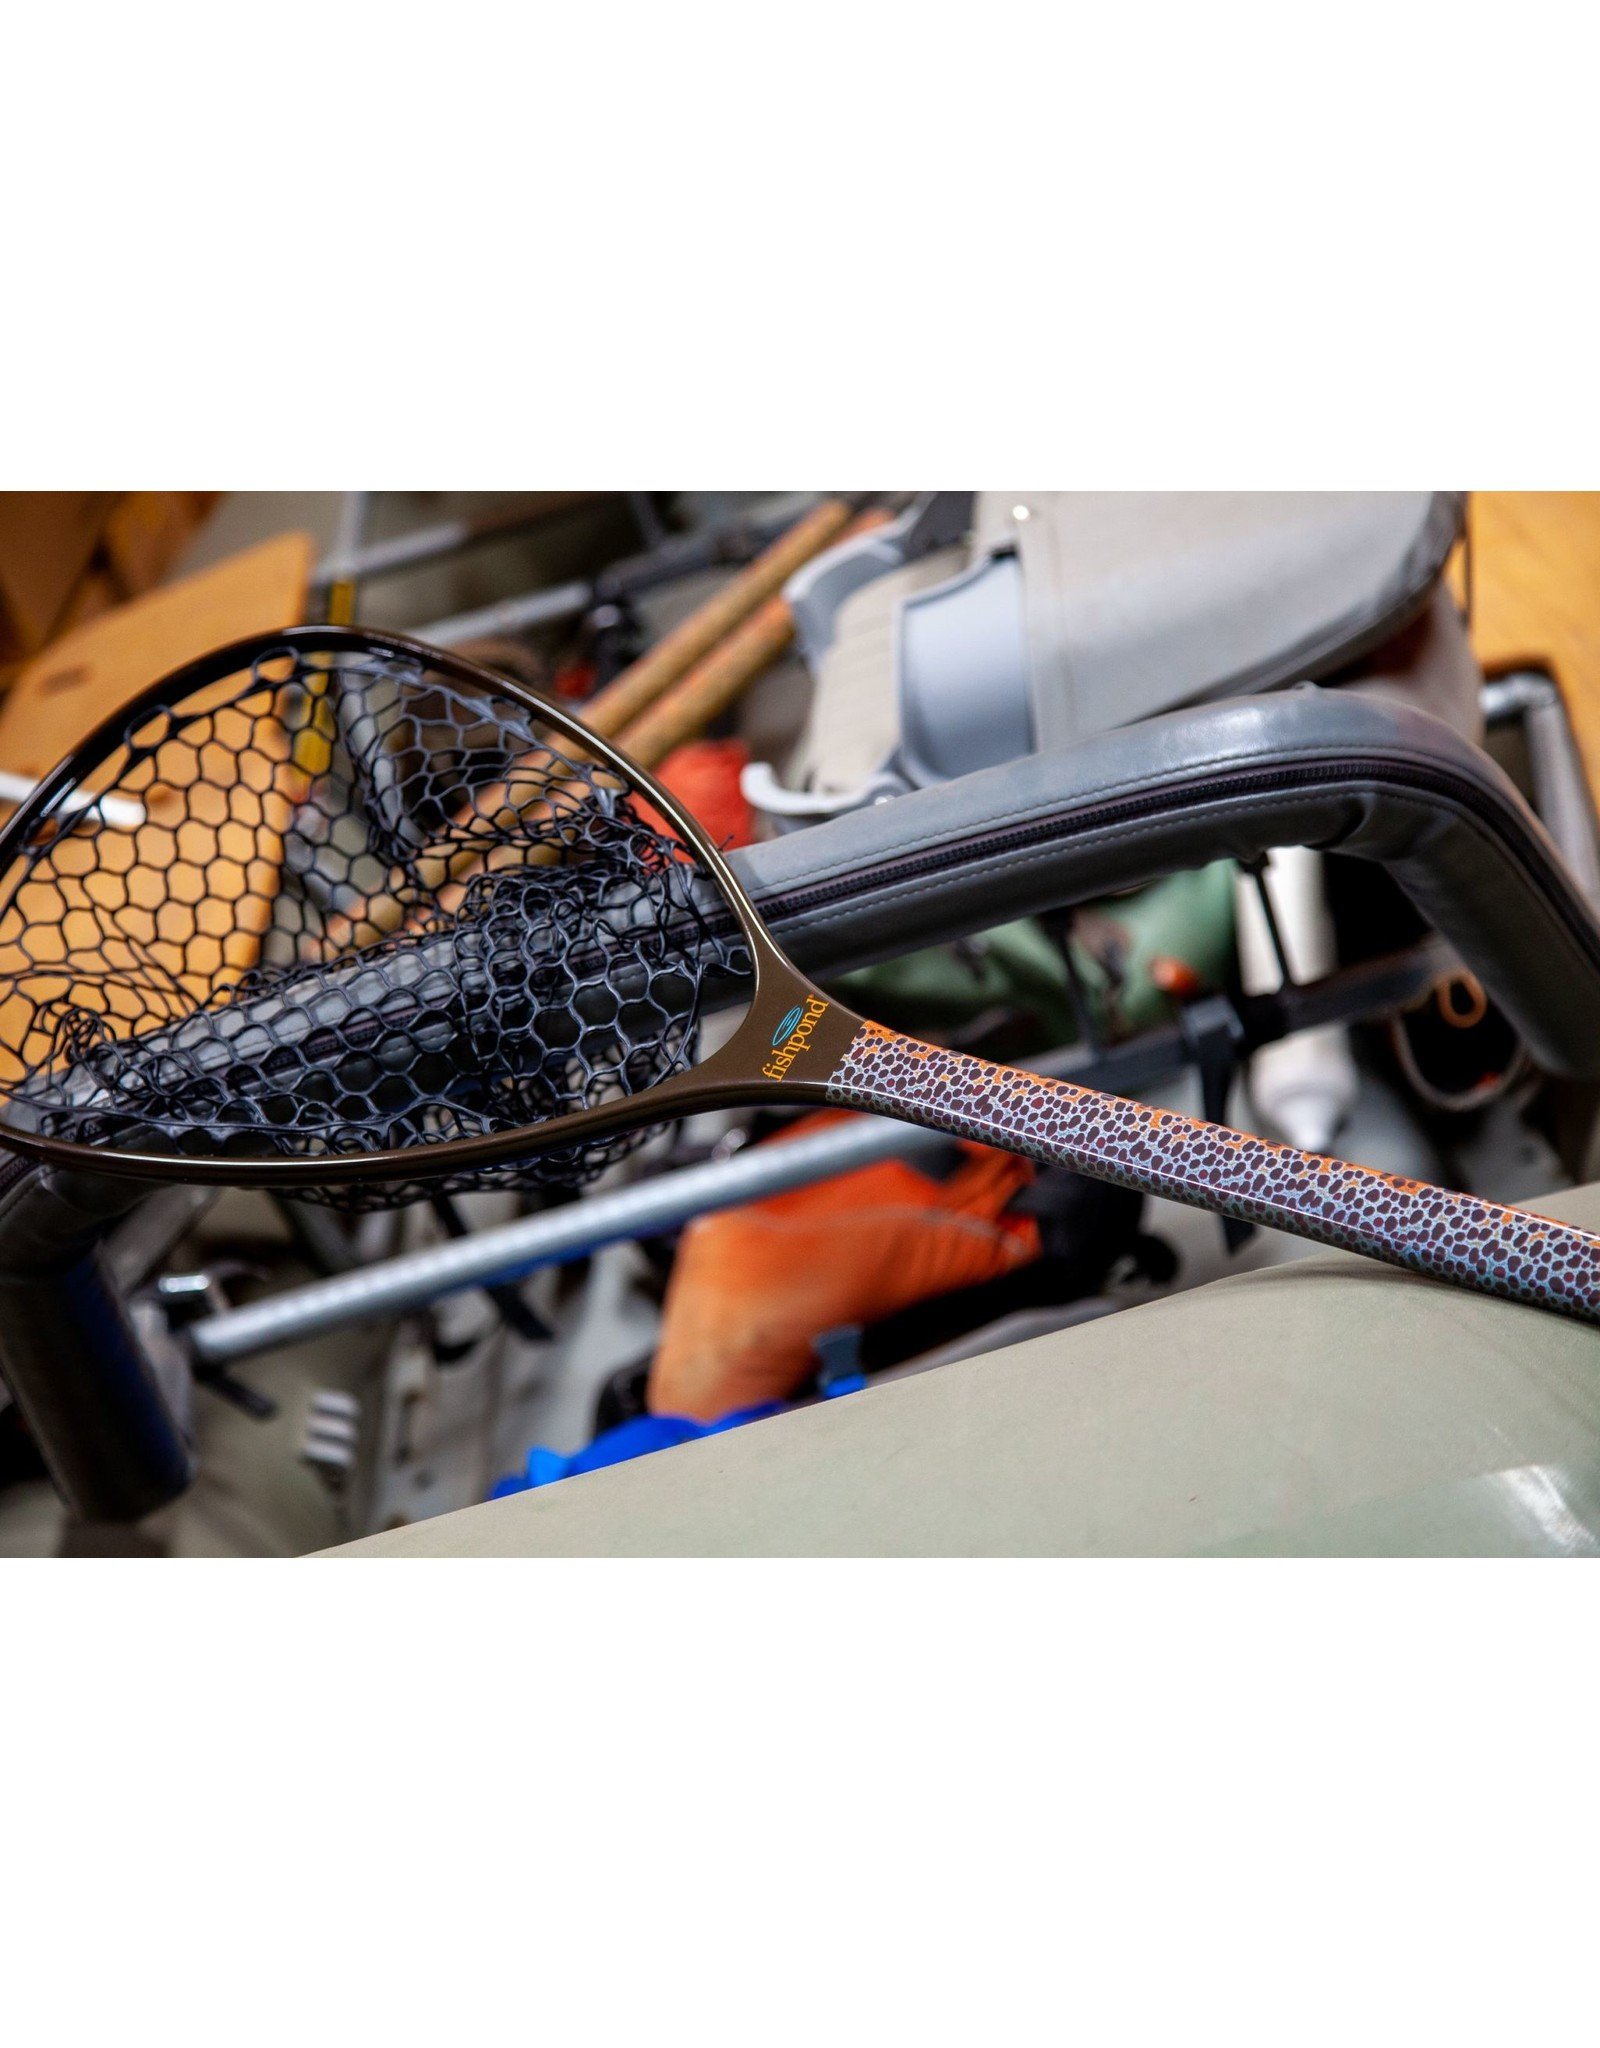 Fishpond Nomad Mid-Length Net (Slab-Brown Trout Special Edition